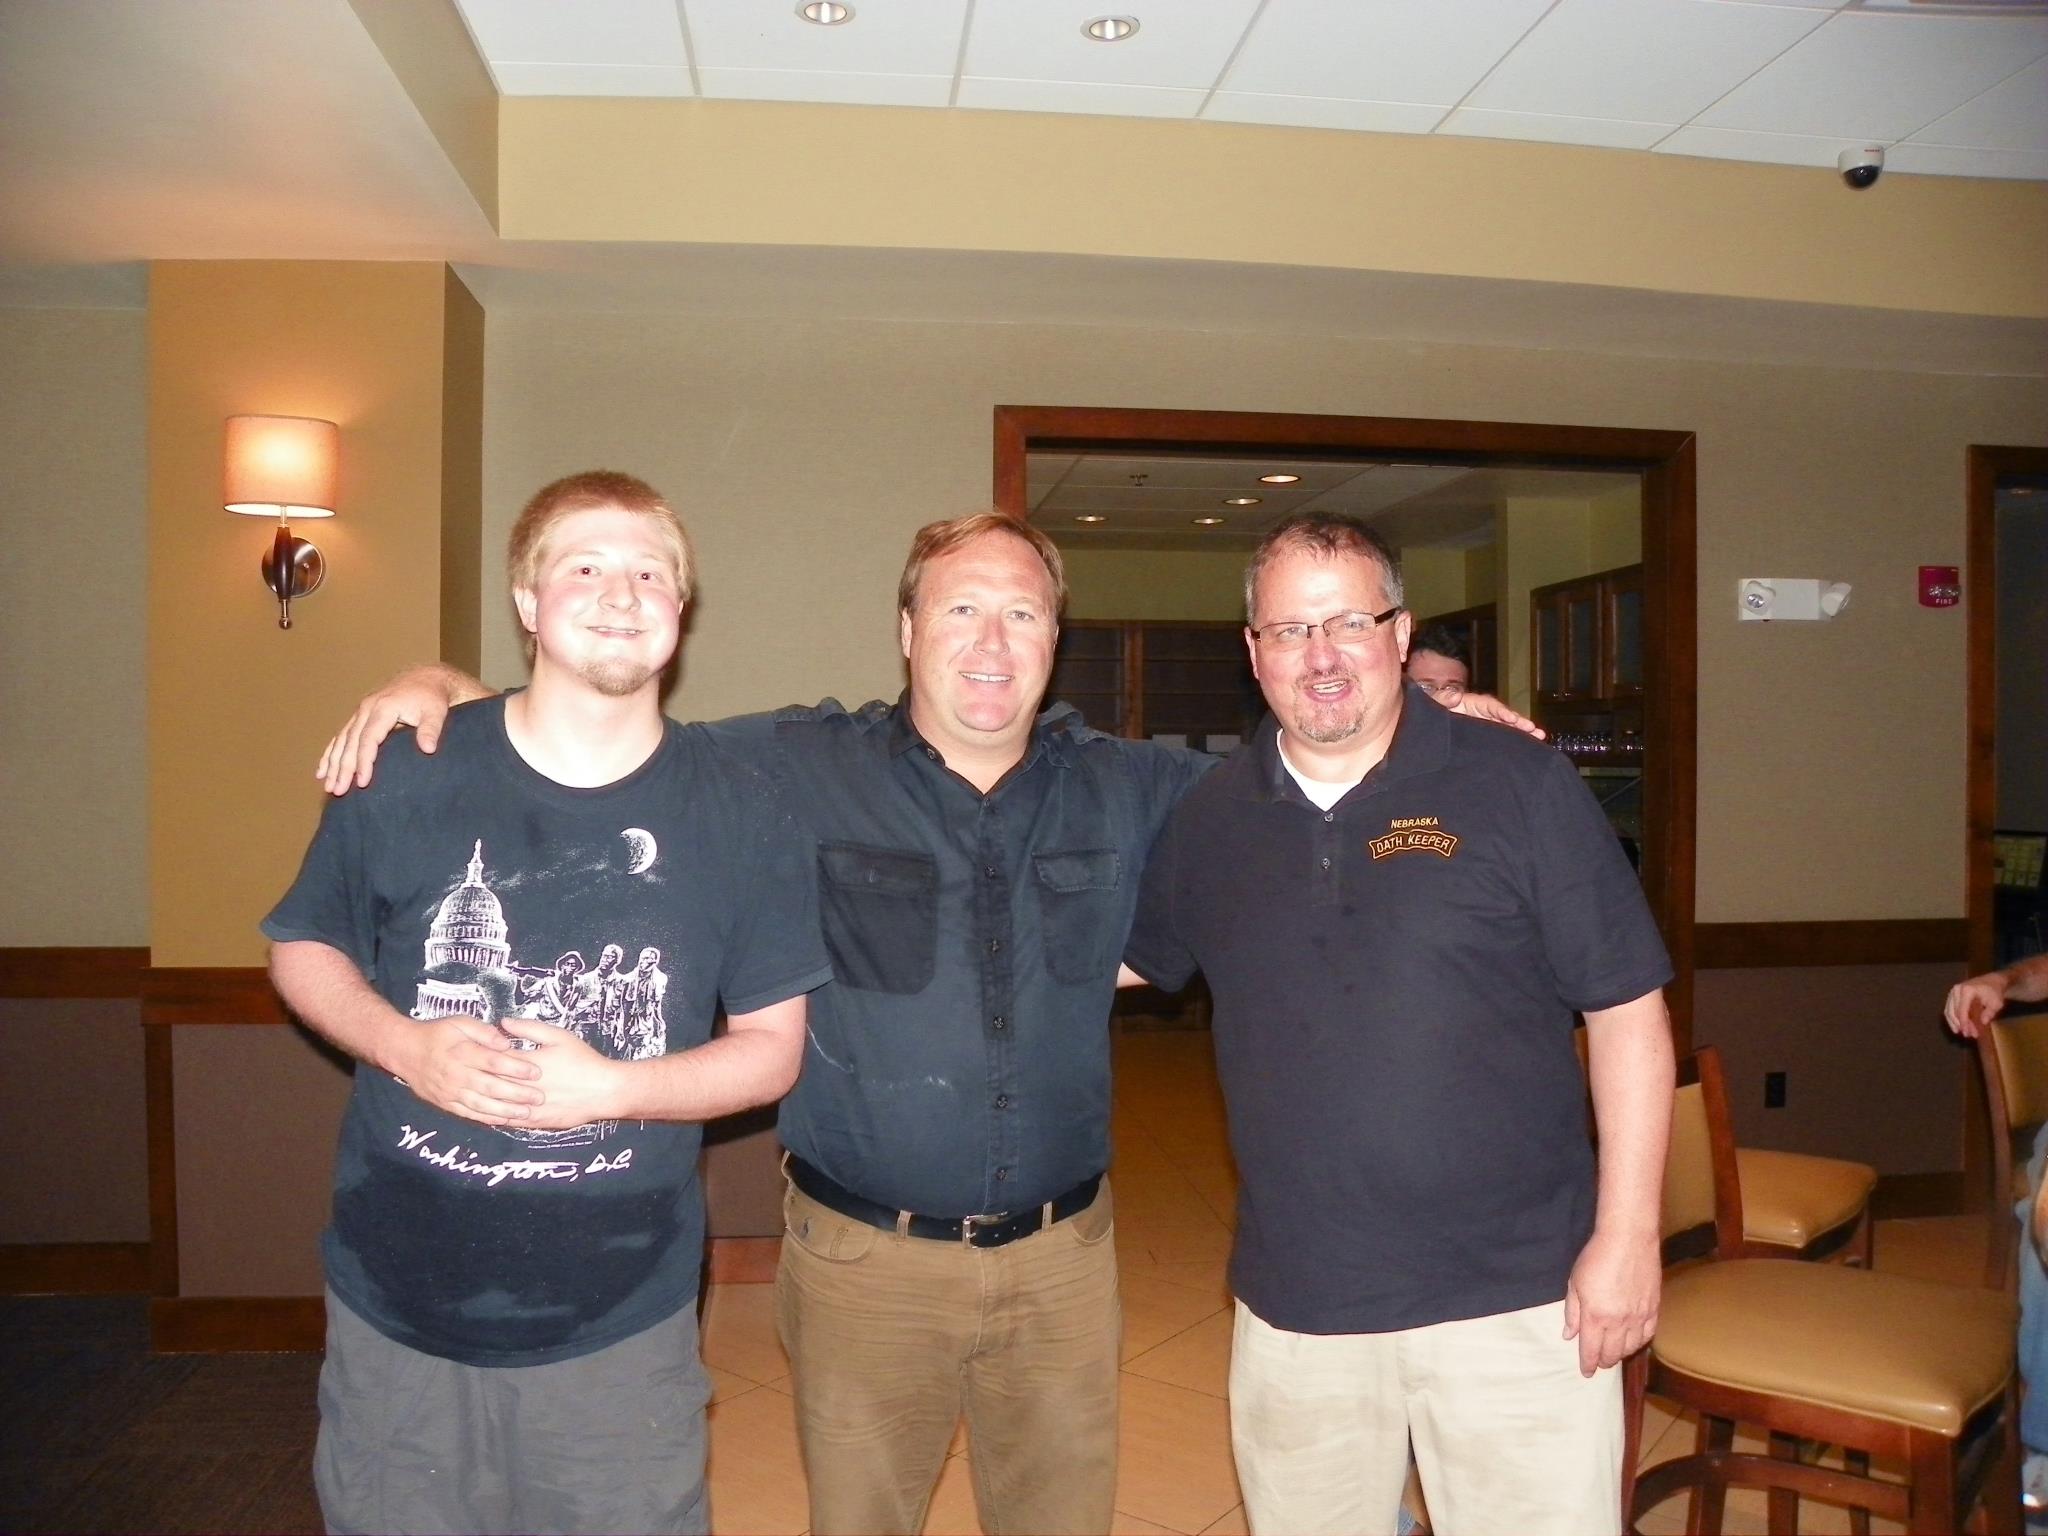 former_alt_news_founder_brian_hill_with_alex_jones_of_infowars_and_stewart_rhodes_of_oath_keepers_organization